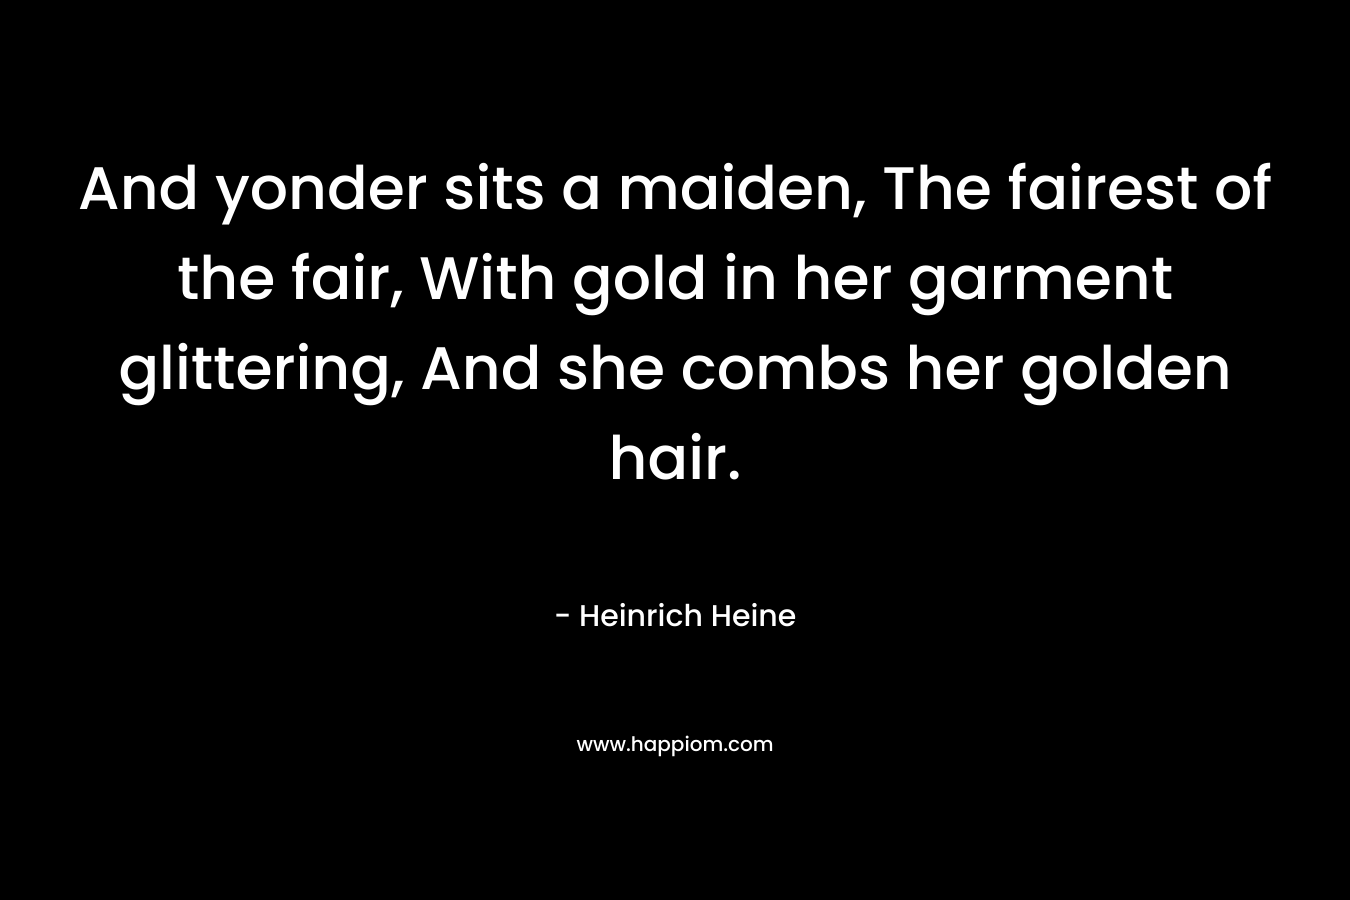 And yonder sits a maiden, The fairest of the fair, With gold in her garment glittering, And she combs her golden hair. – Heinrich Heine